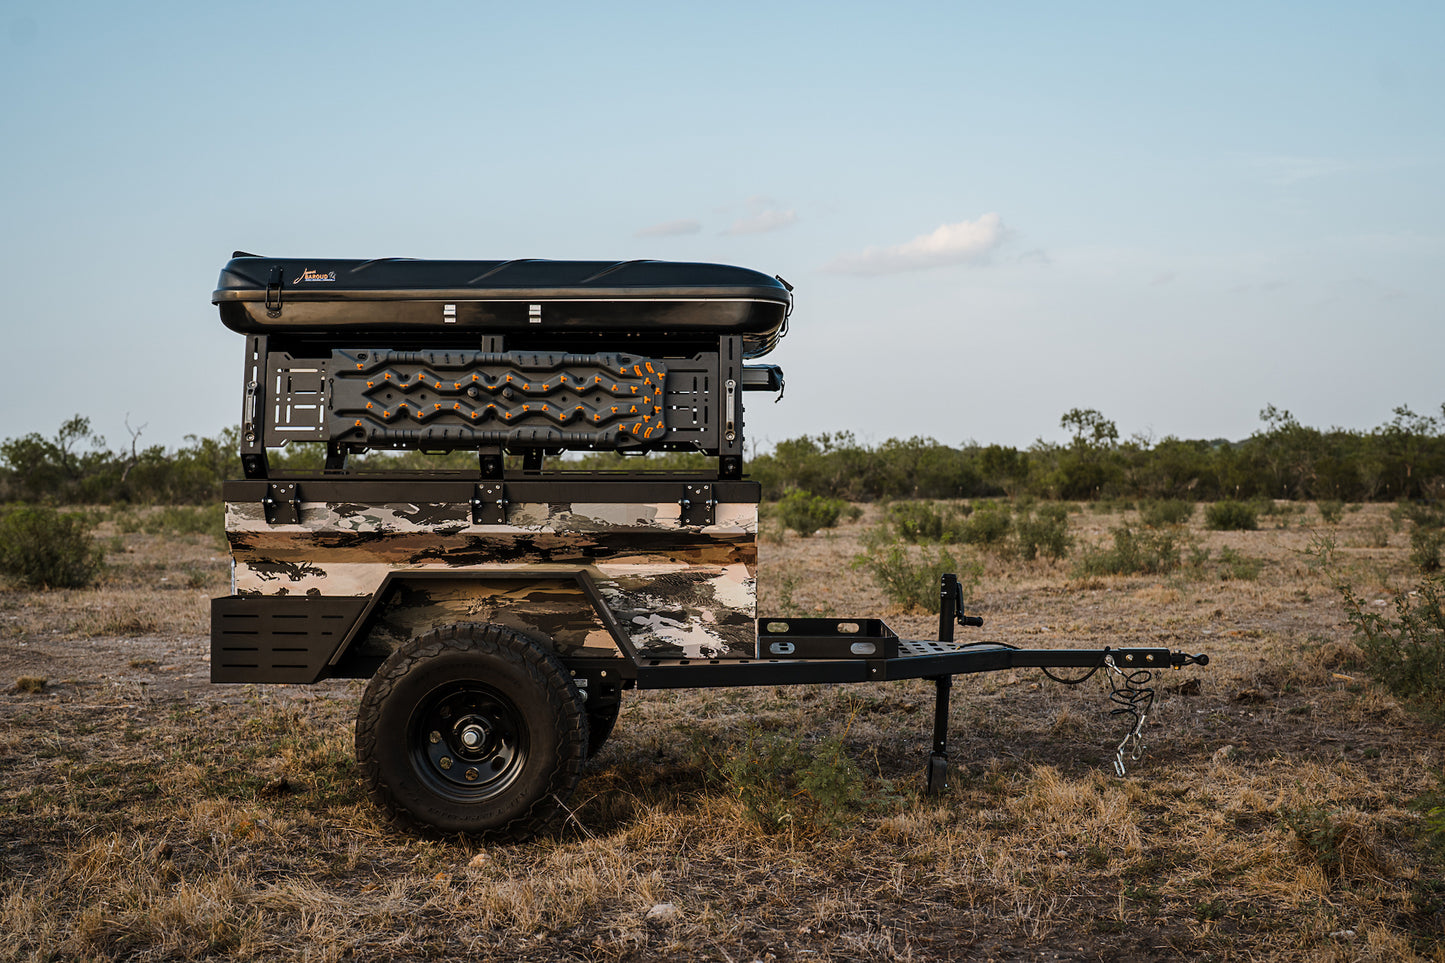 rustic mountain overland utility camping trailers for sale near austin dallas houston texas at hawkes outdoors 210-251-2882